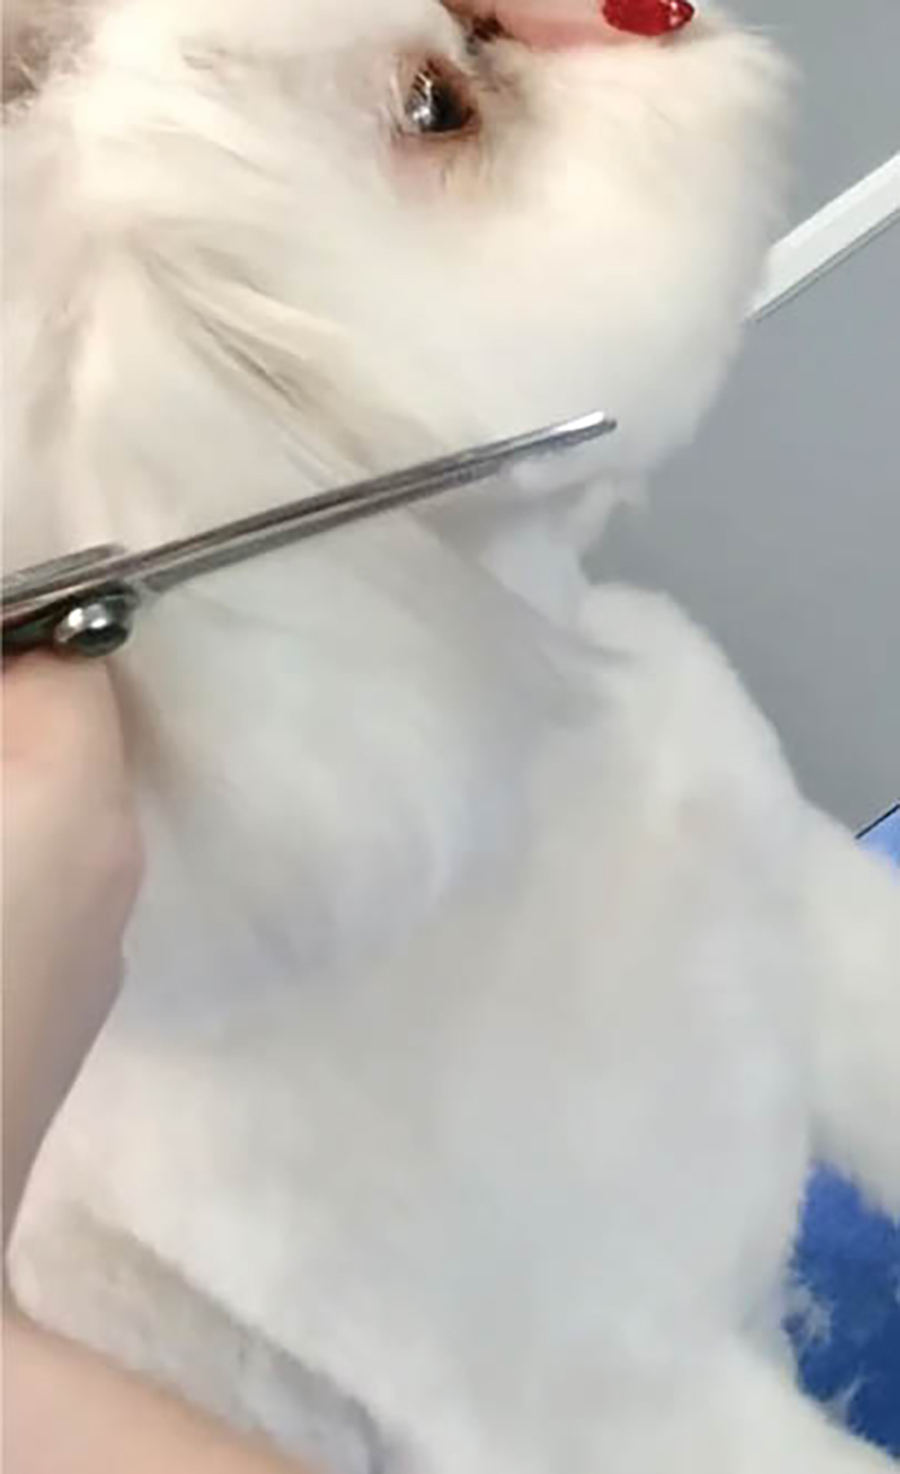 trimming around a dog's natural curve of their muzzle